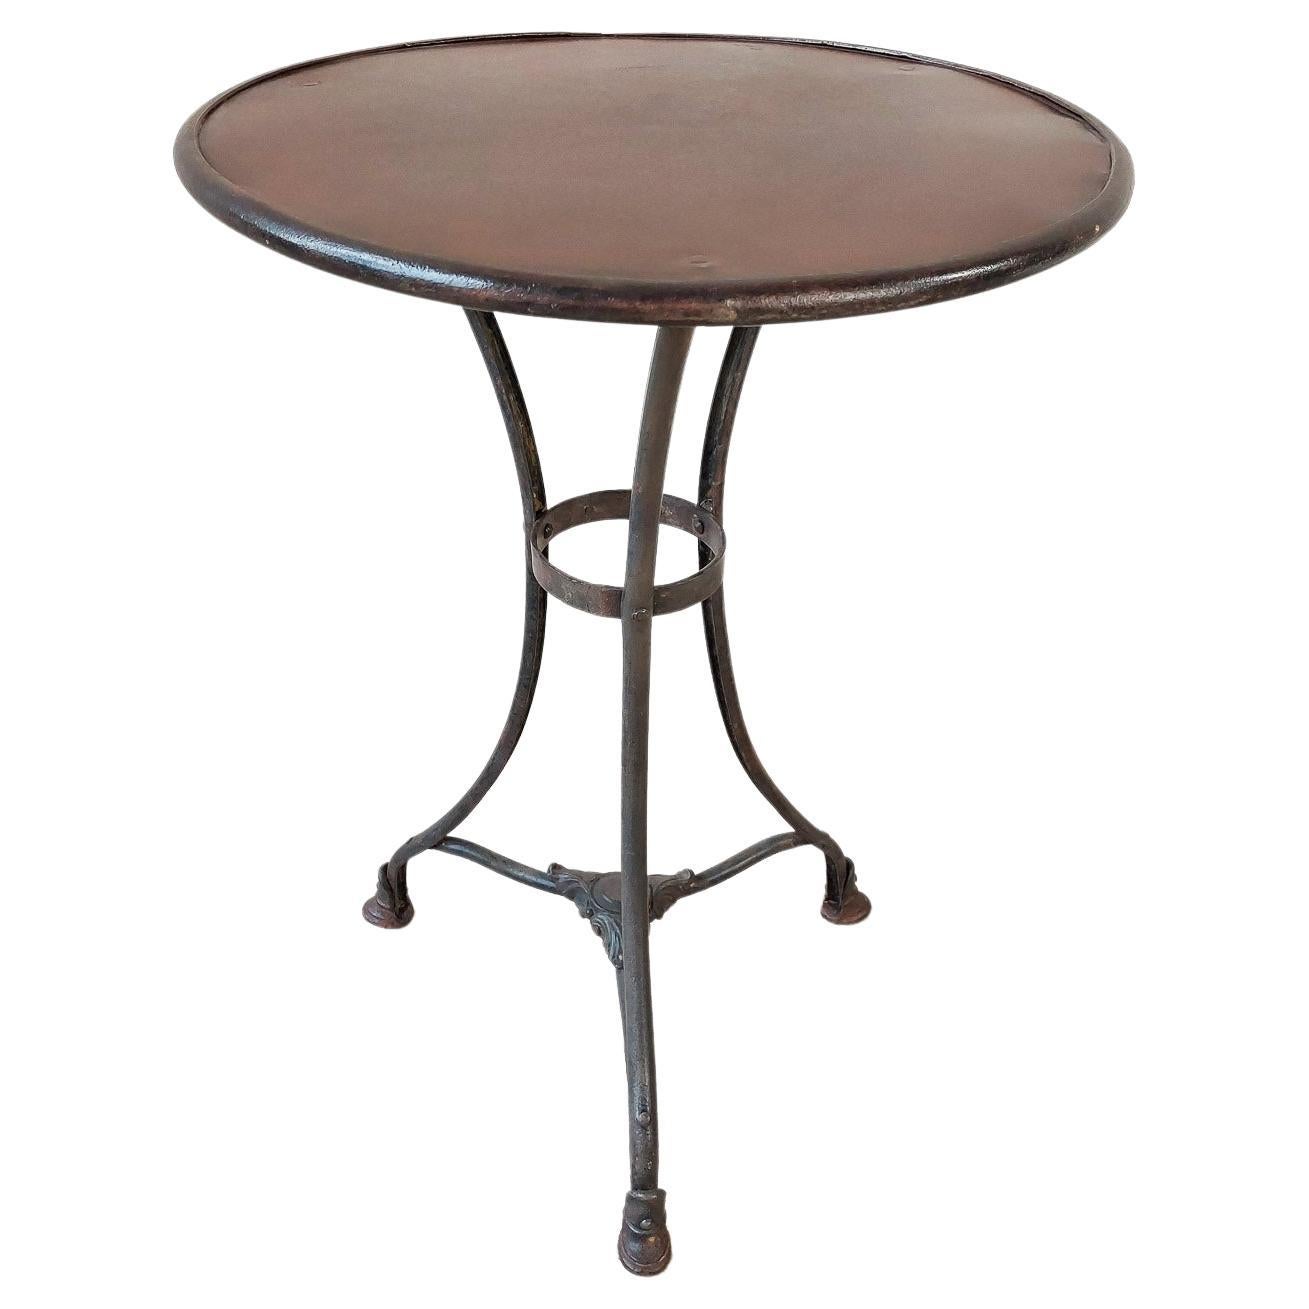 19th Century Wrough and Cast Iron Table from Arras